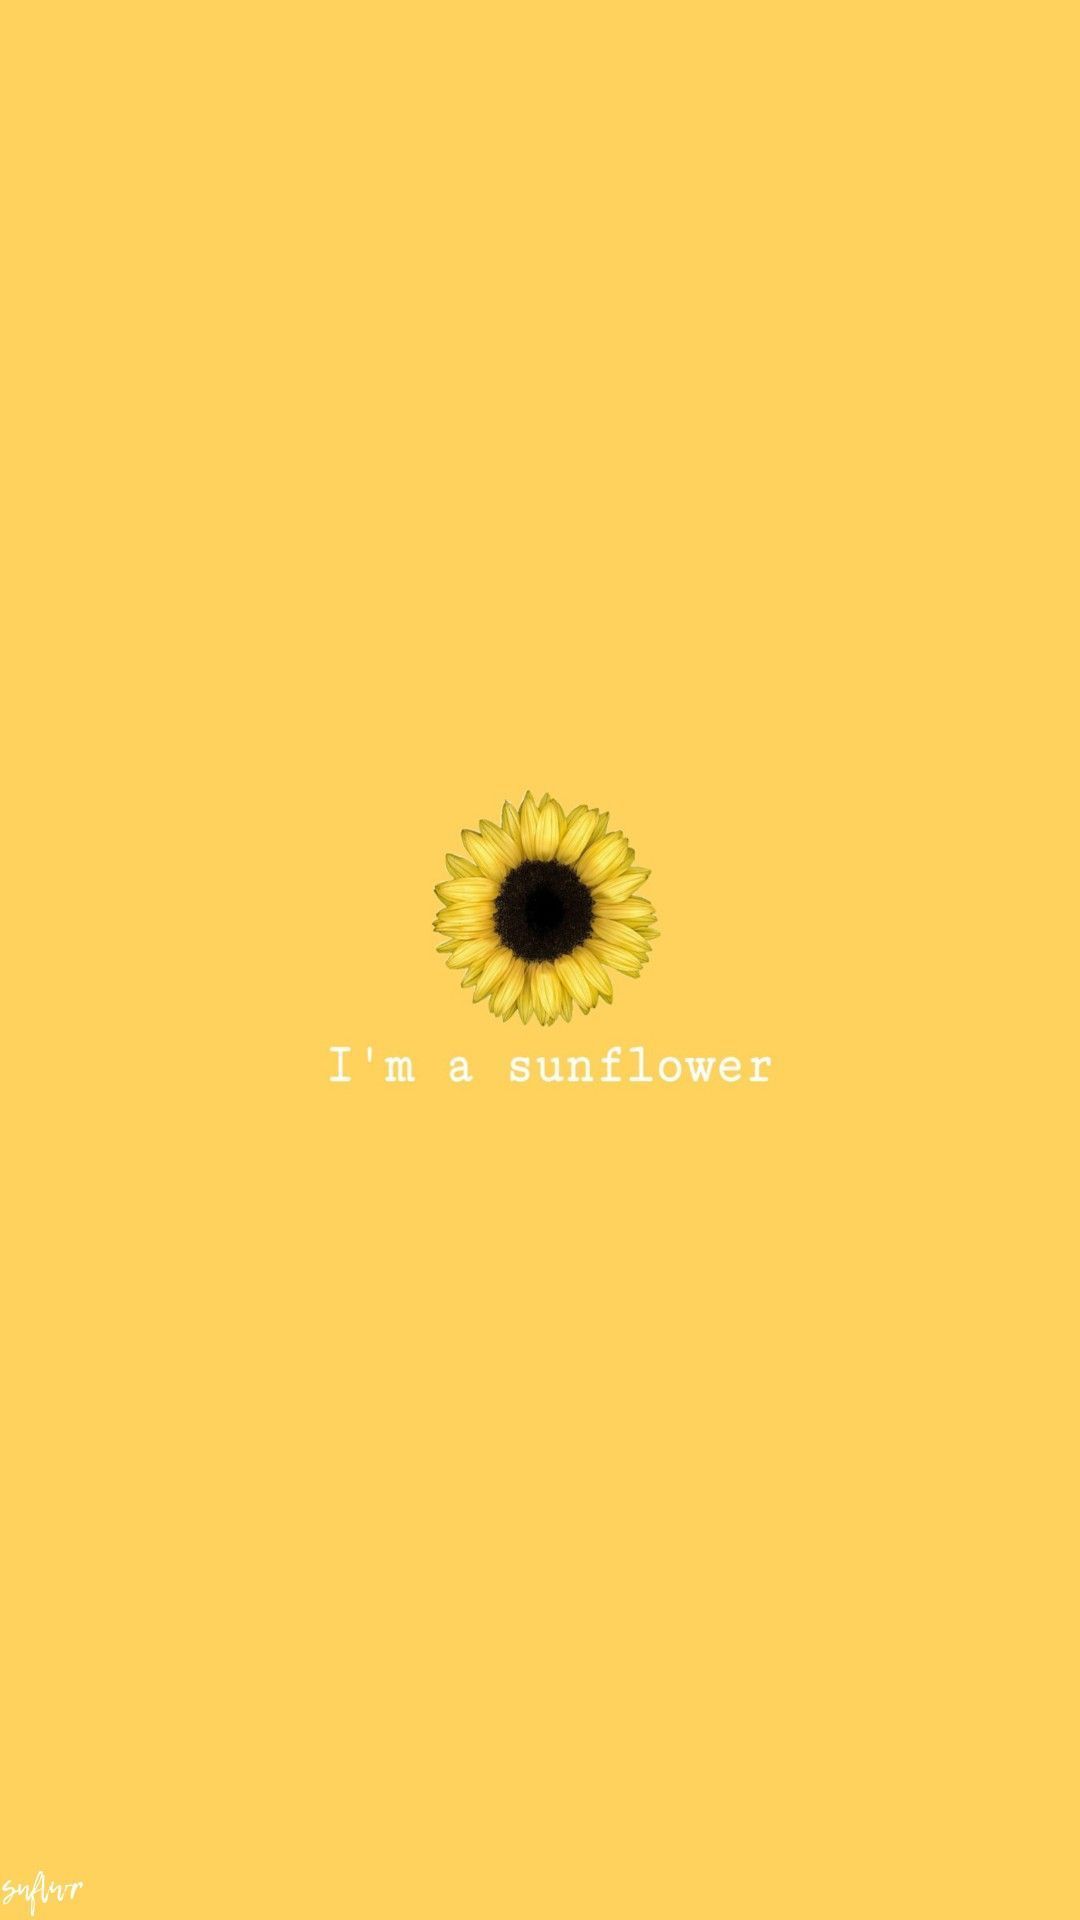 Tumblr sunflowers quotes Free png sunflower png tumblr png image with transparent sun